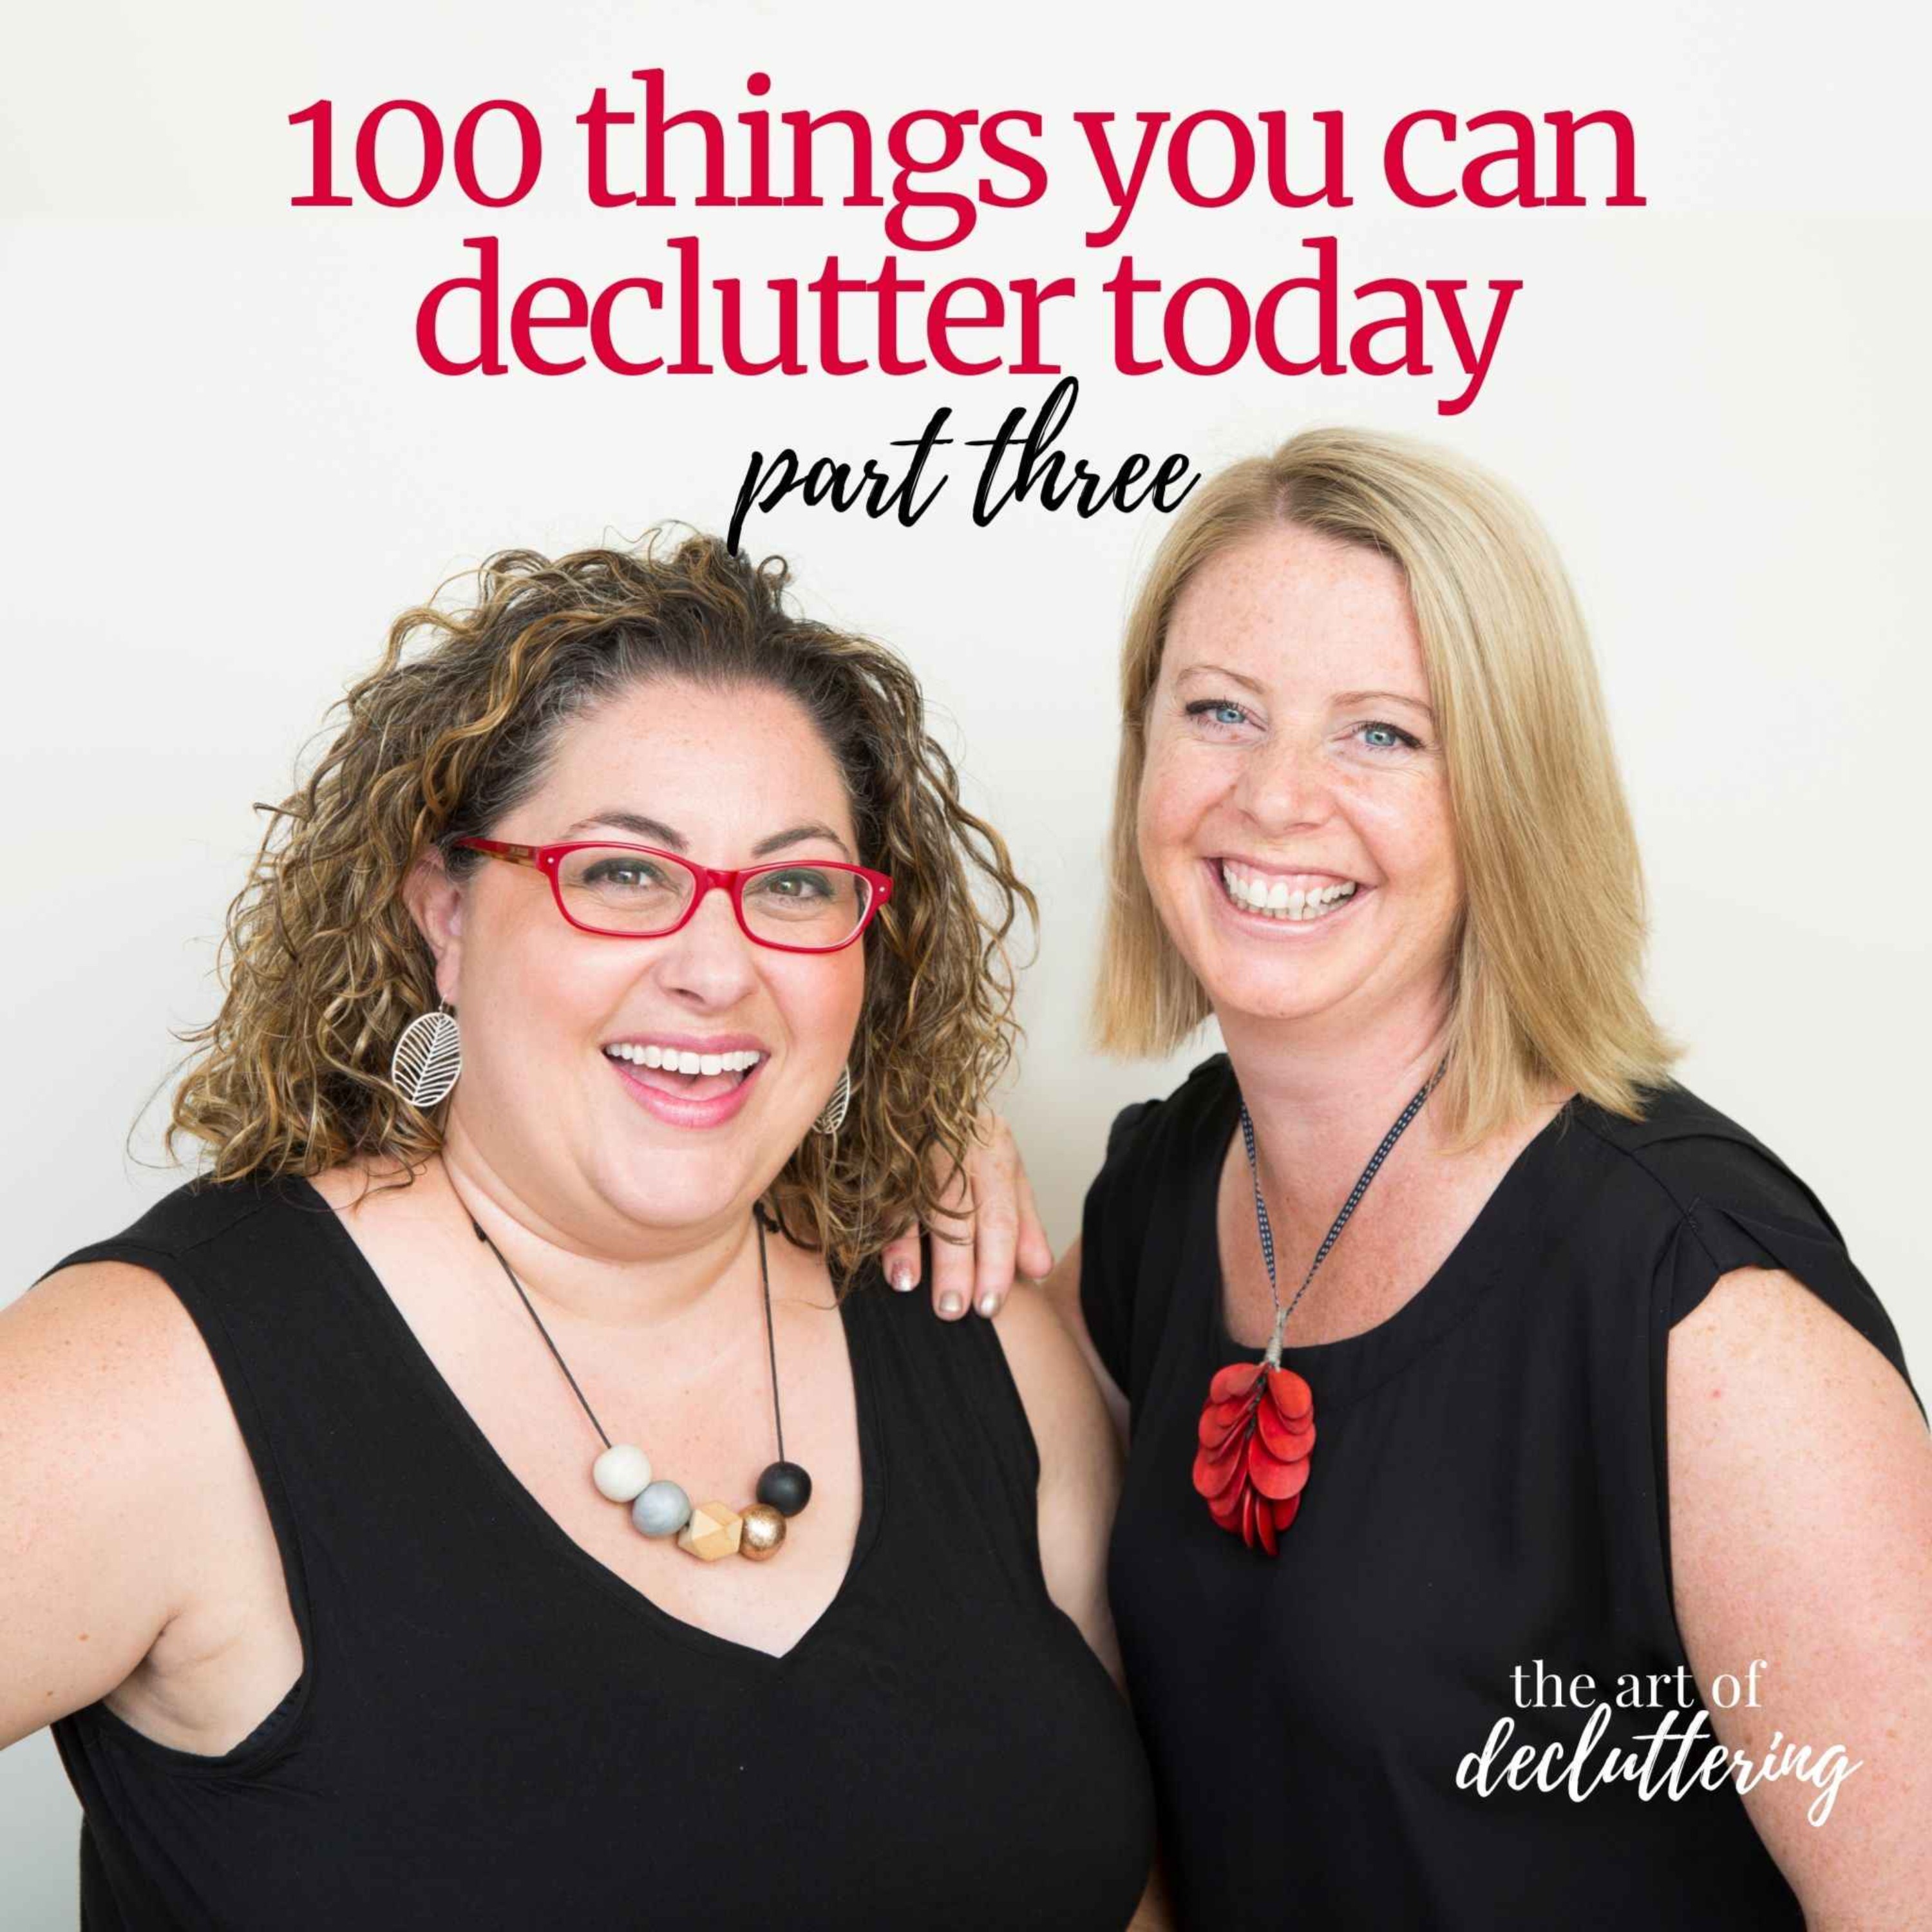 100 things you can declutter today - Part 3